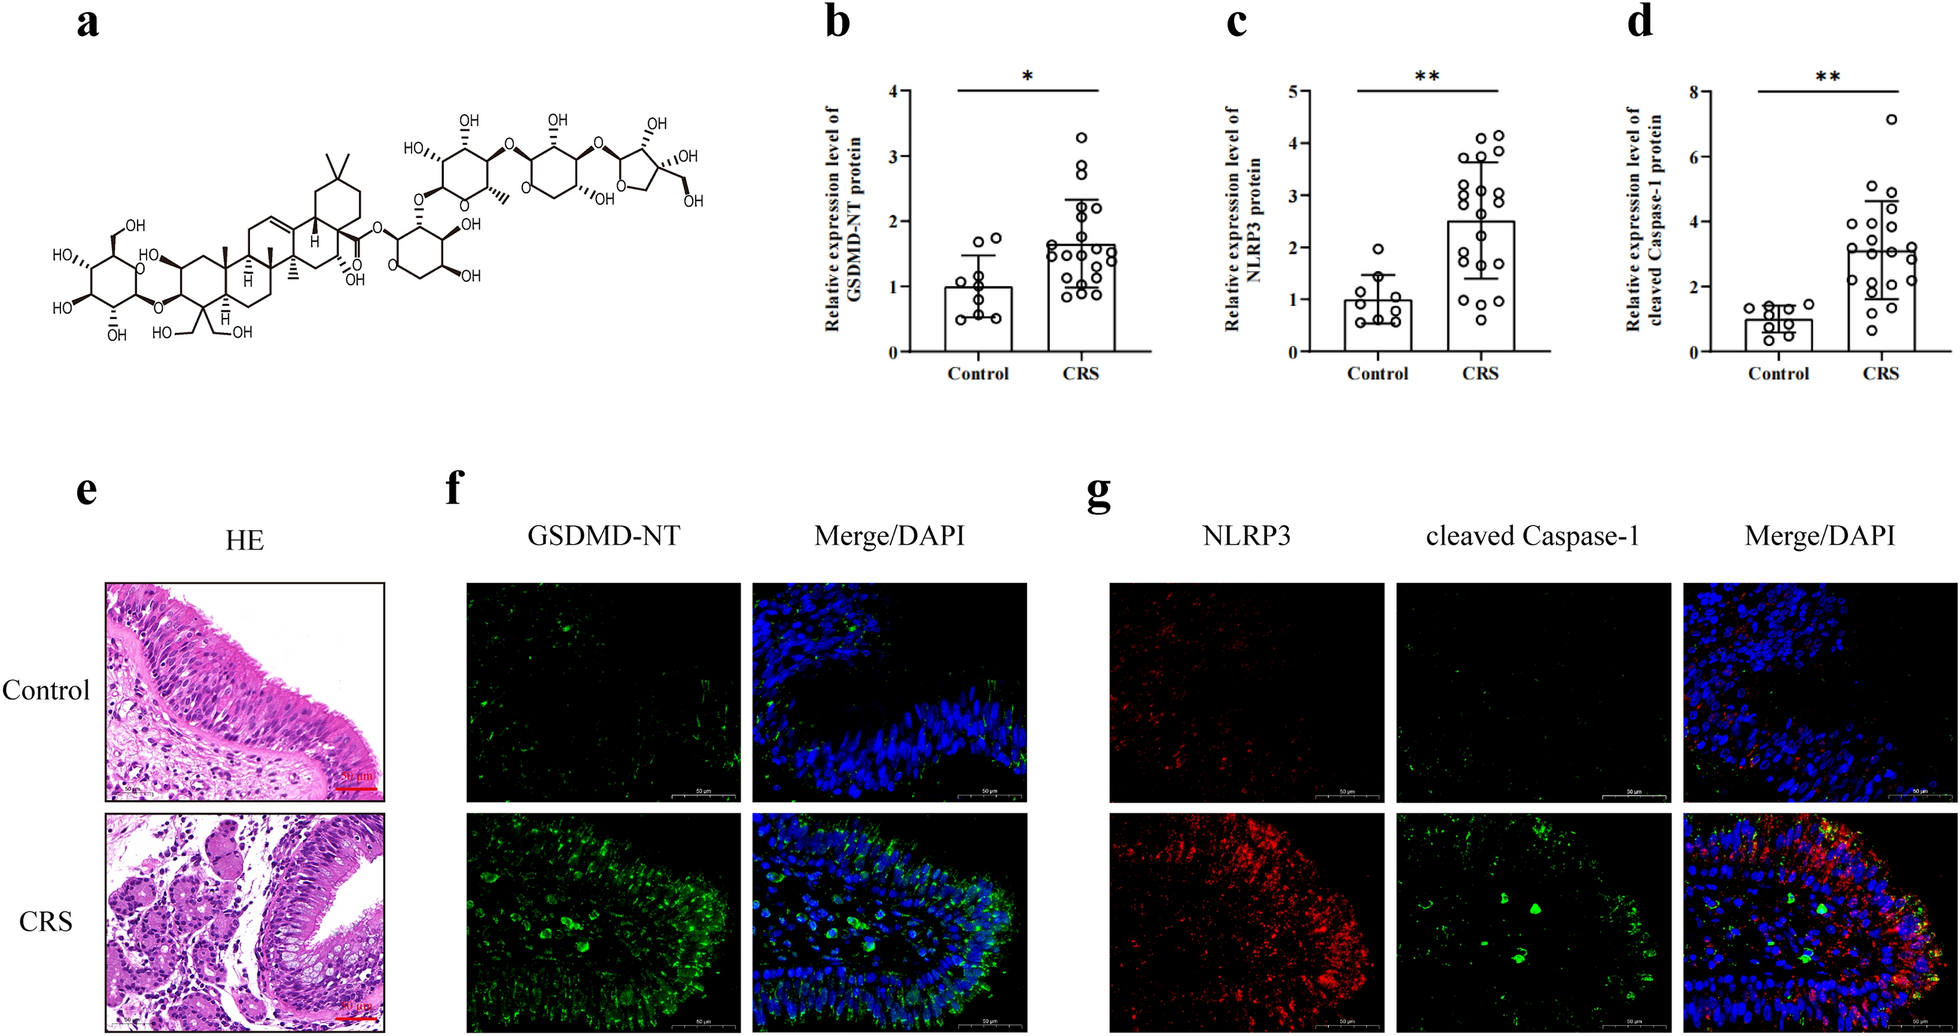 Platycodon D protects human nasal epithelial cells from pyroptosis through the Nrf2/HO-1/ROS signaling cascade in chronic rhinosinusitis